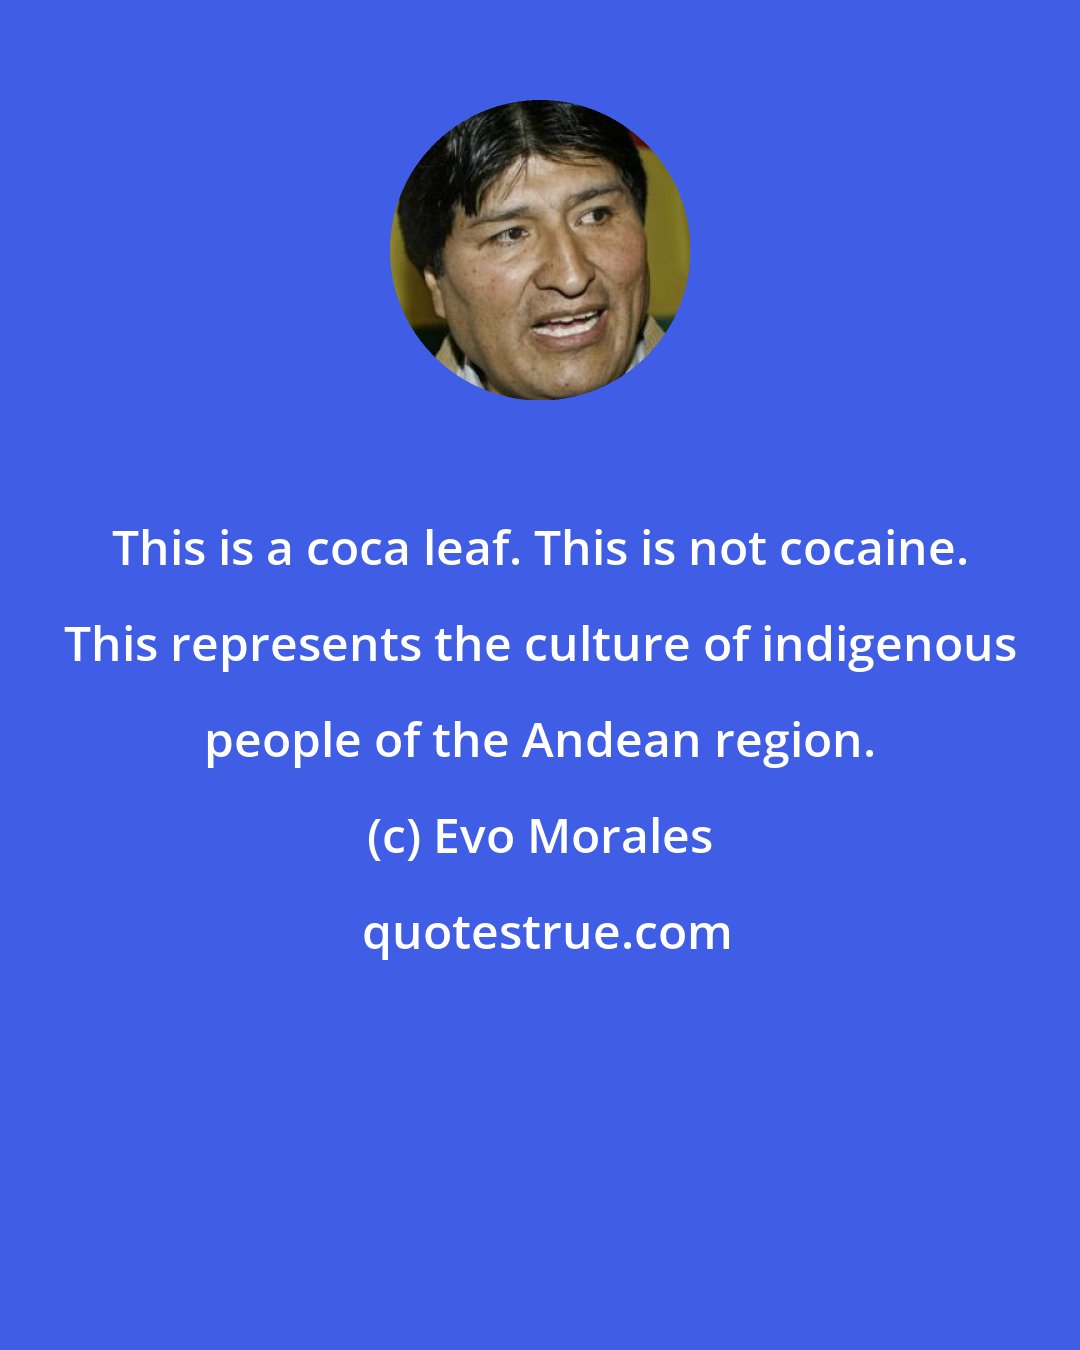 Evo Morales: This is a coca leaf. This is not cocaine. This represents the culture of indigenous people of the Andean region.